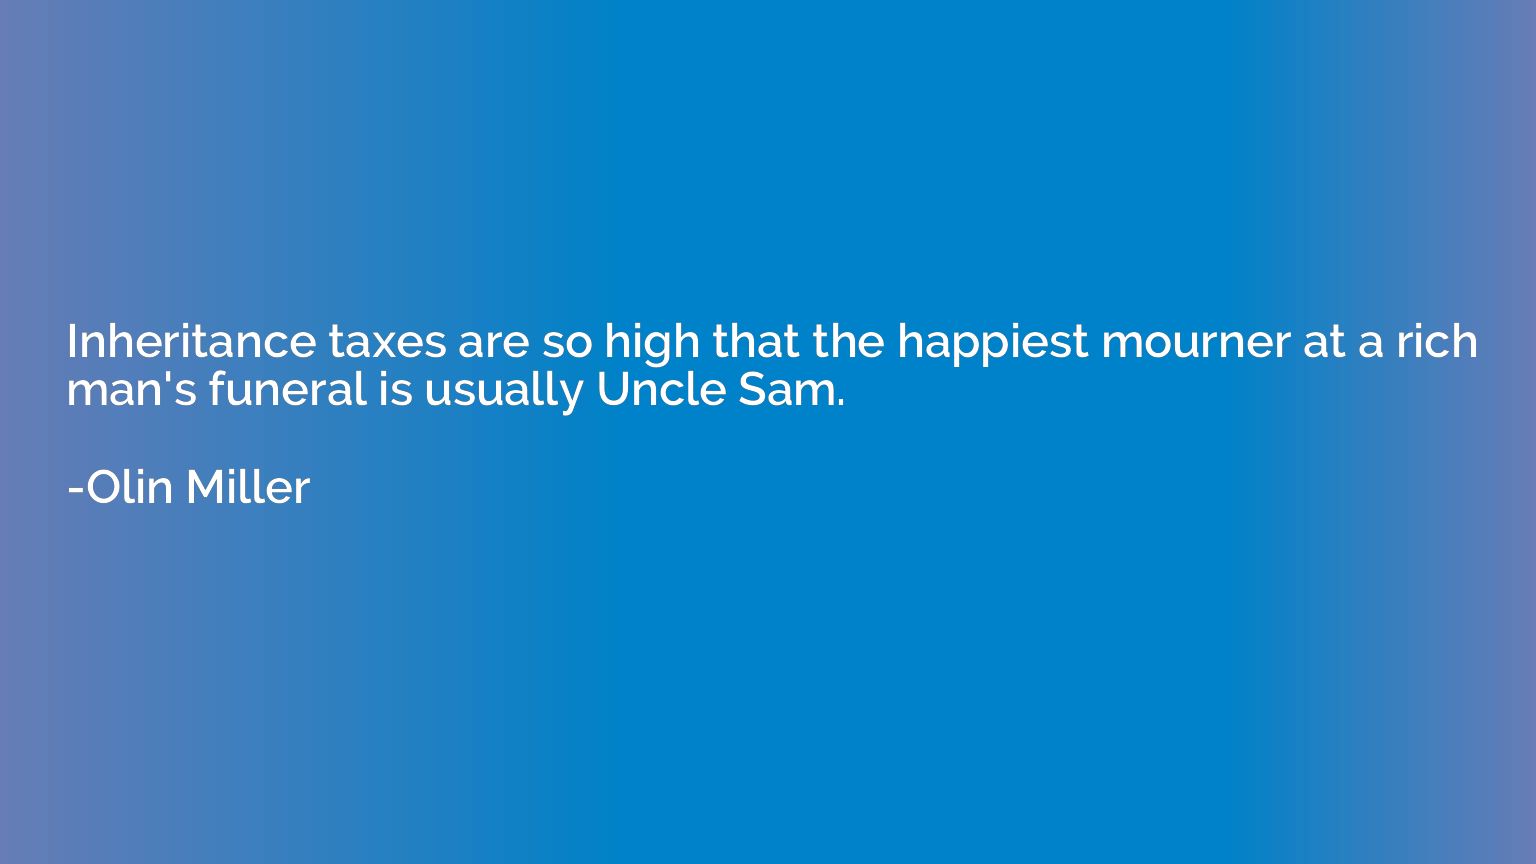 Inheritance taxes are so high that the happiest mourner at a